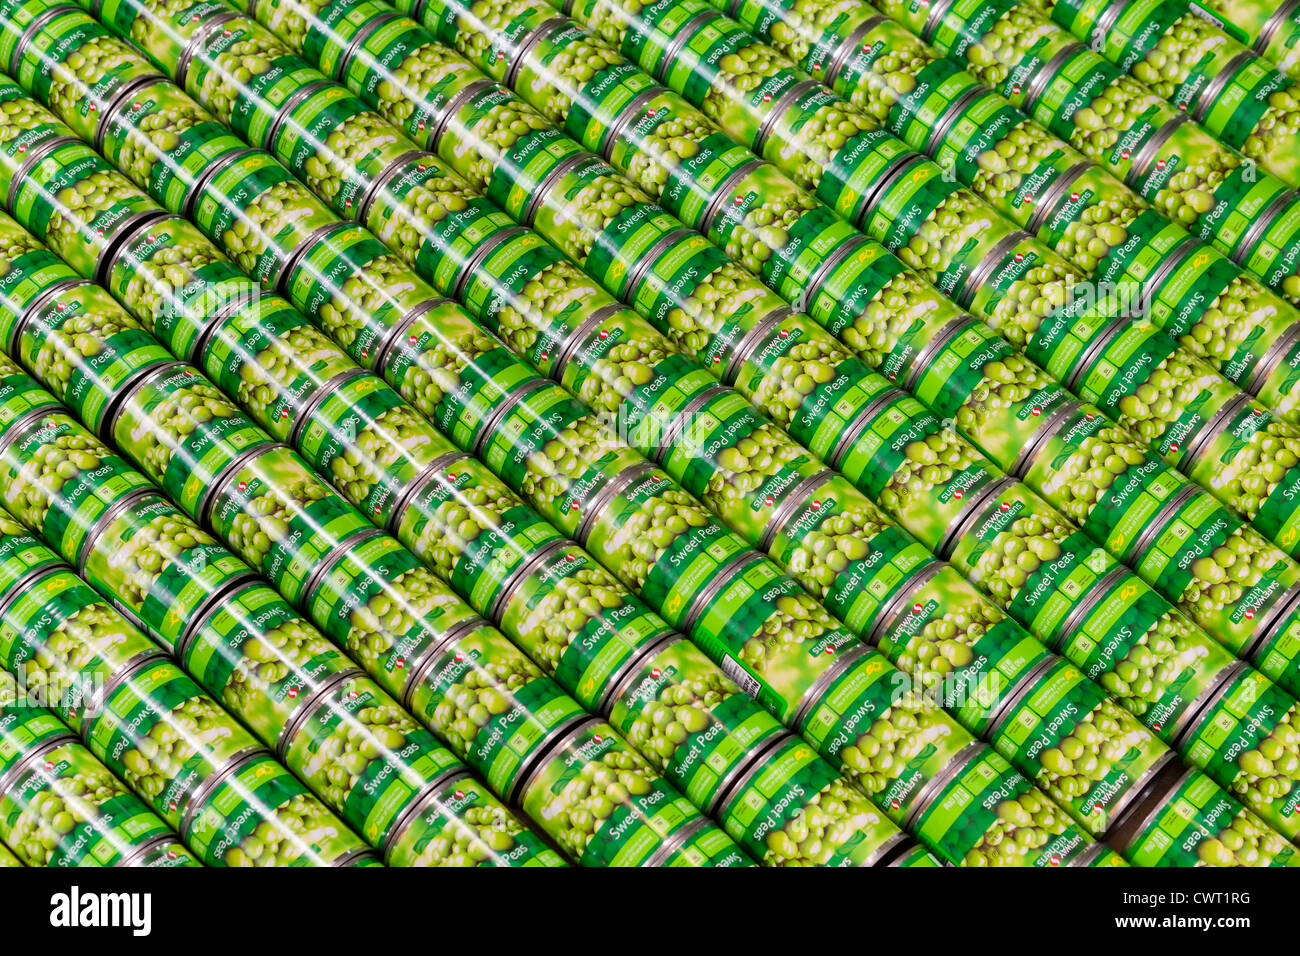 Stacked canned sweet peas Stock Photo